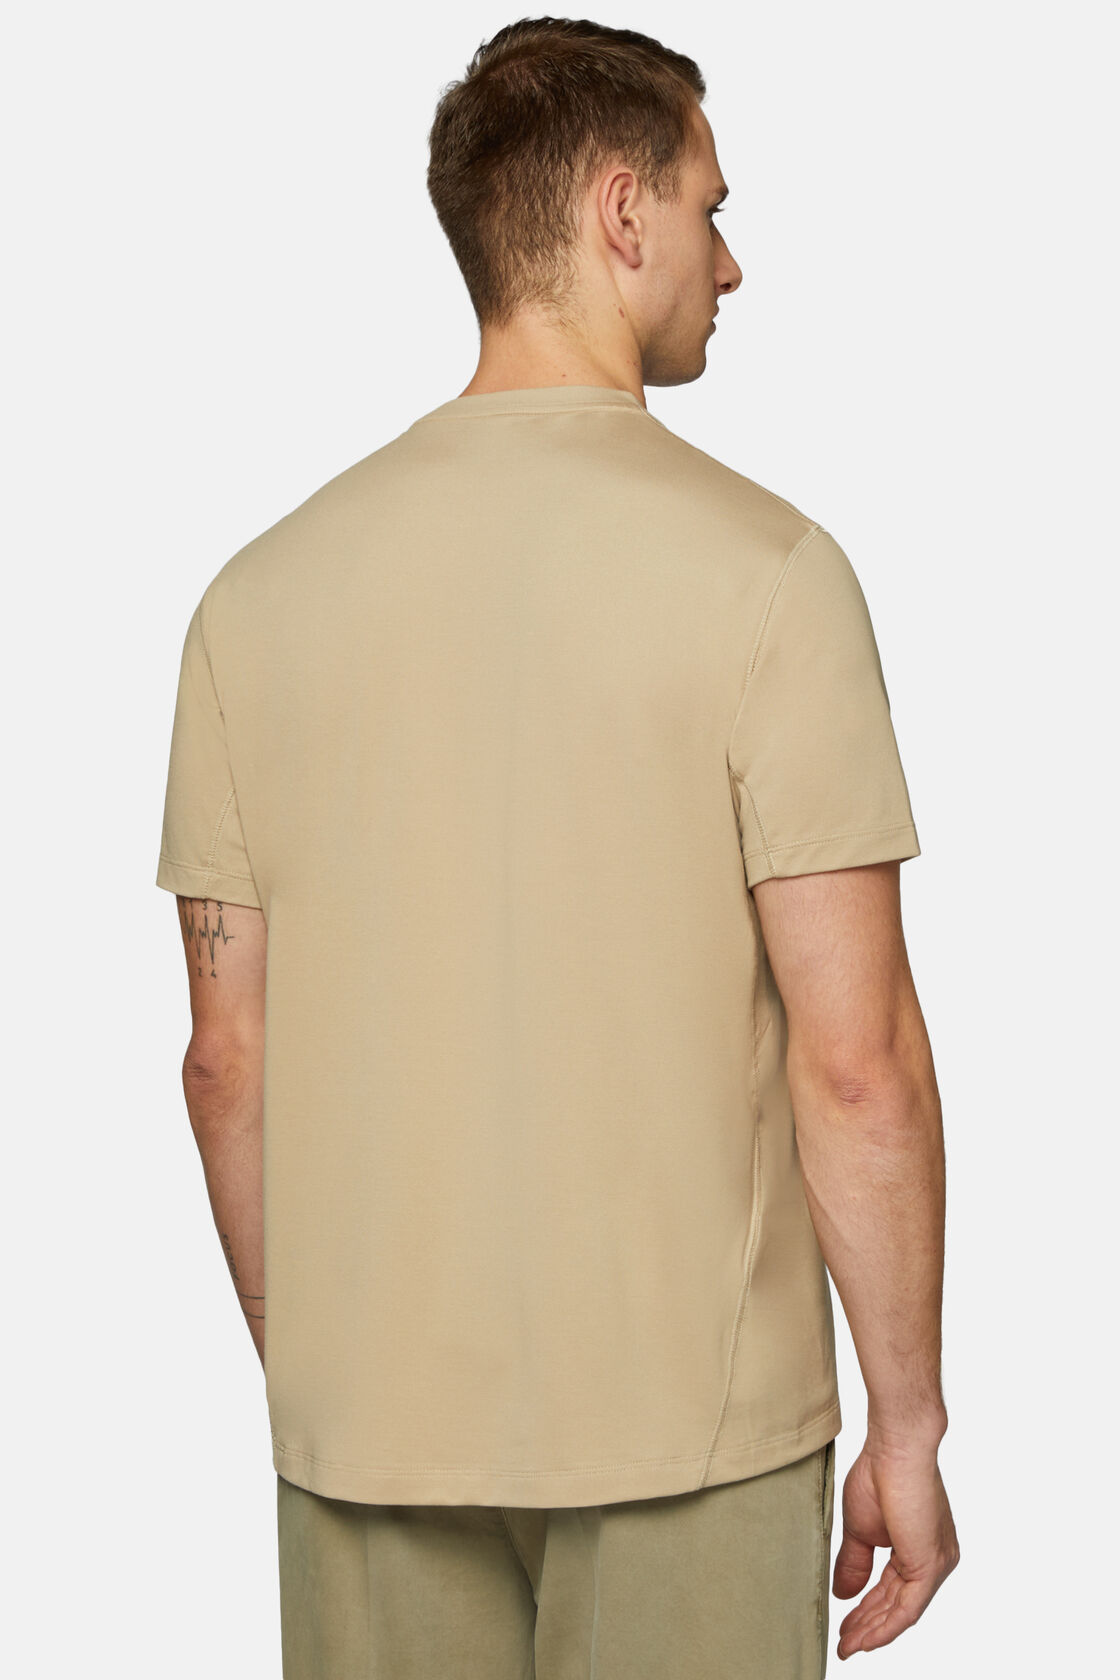 T-Shirt in Sustainable Performance Pique, Beige, hi-res